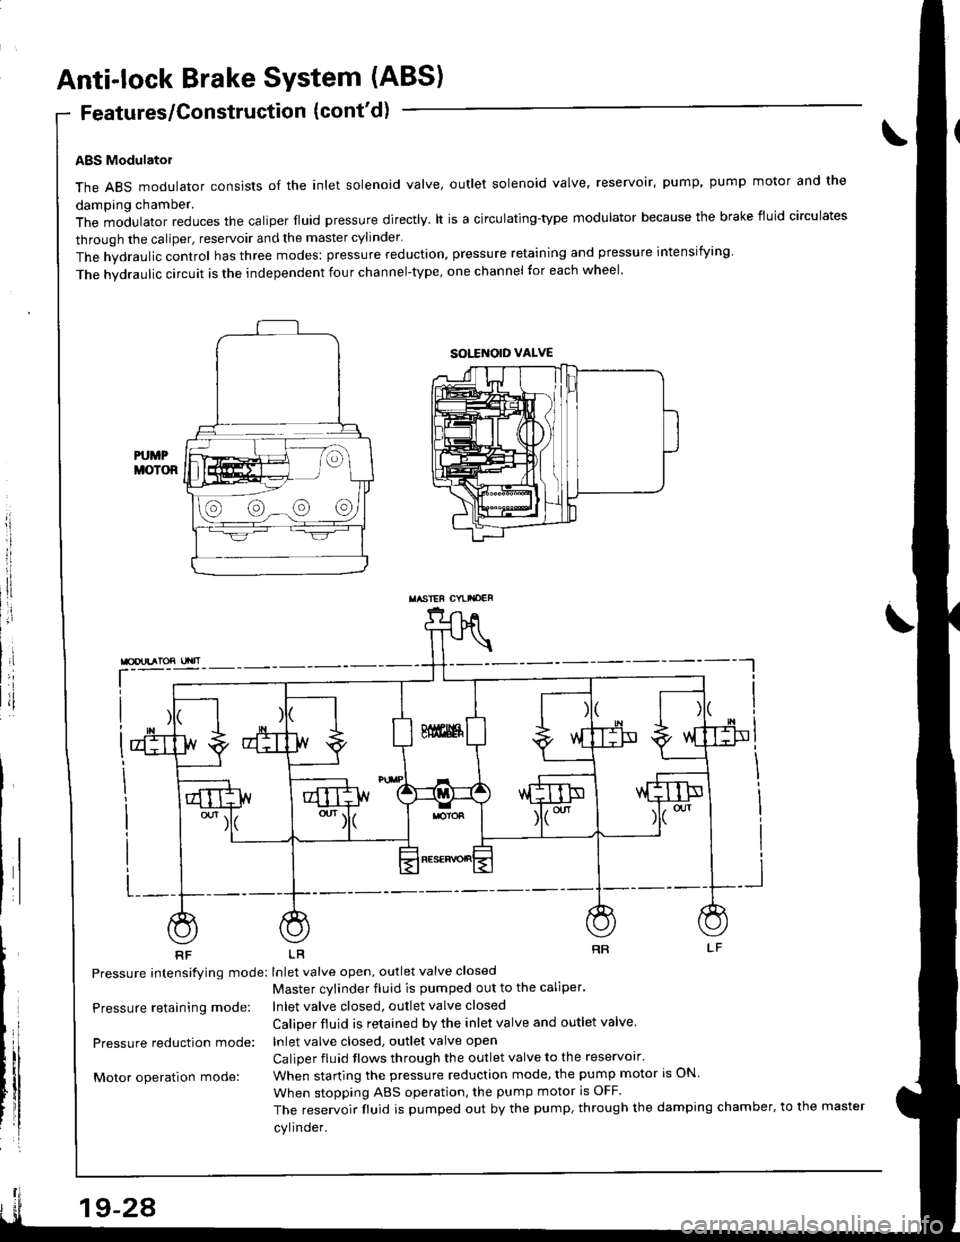 HONDA INTEGRA 1998 4.G Workshop Manual Anti-lock Brake System (ABS)
Features/Construction (contd)
ABS Modulatol
The ABS modulator consists of the inlet solenoid valve, outlet solenoid valve, reservoir, pump, pump motor and the
damping cha